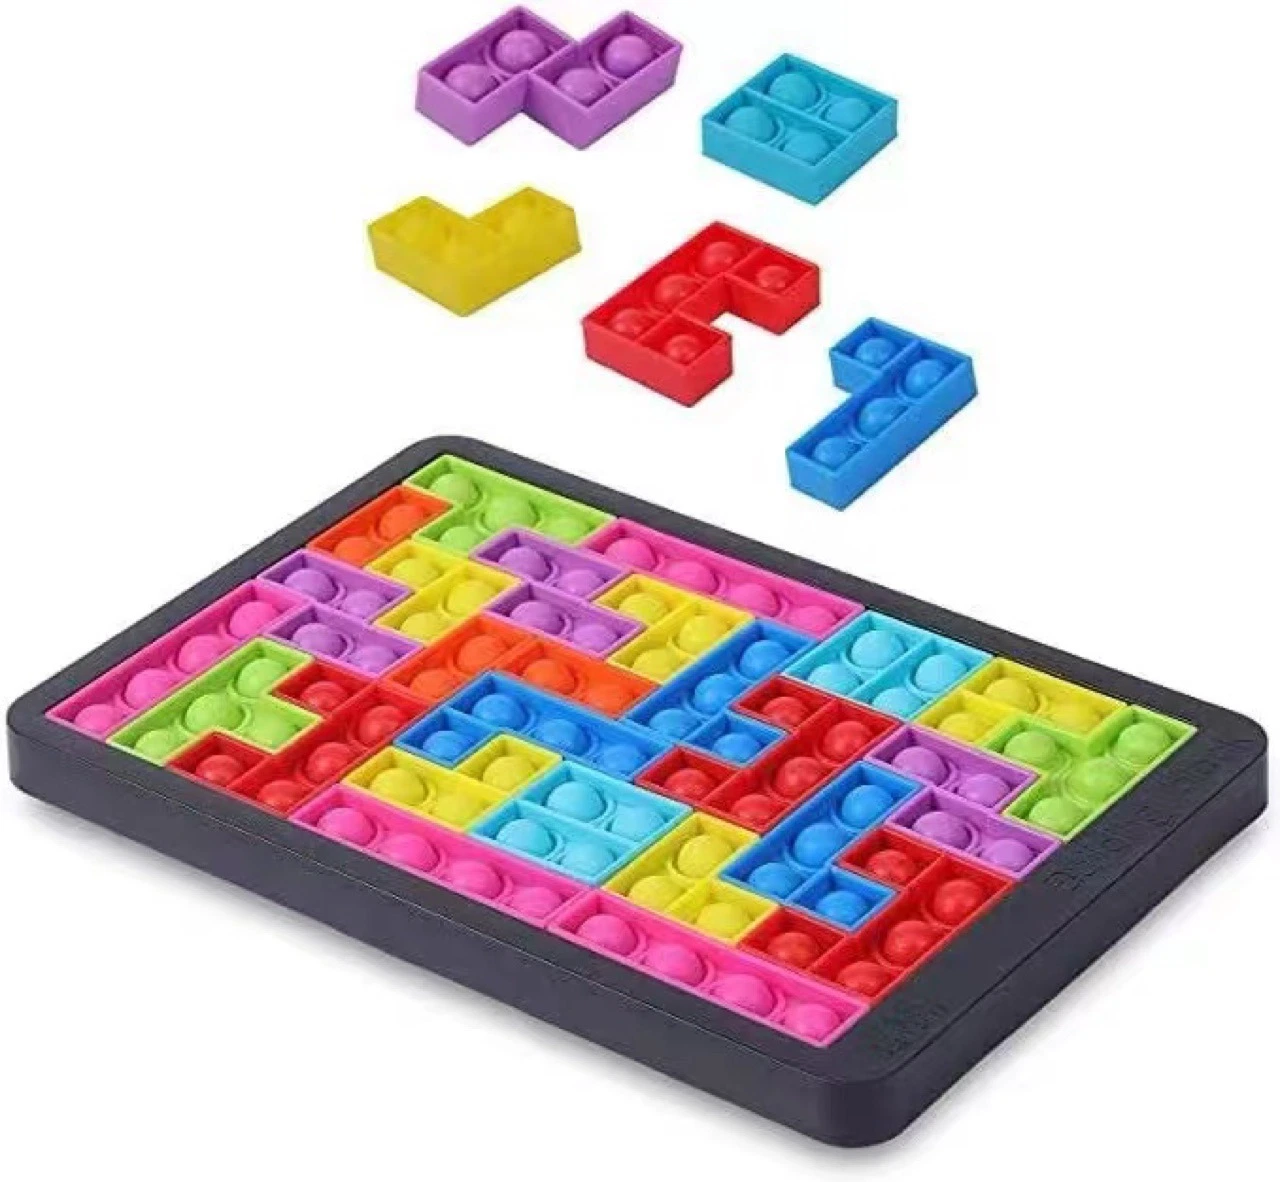 Wholesale Amazon Silicone Kids Educational Toys Creative Magic Cube Pop Stress Relief Jigsaw Puzzle